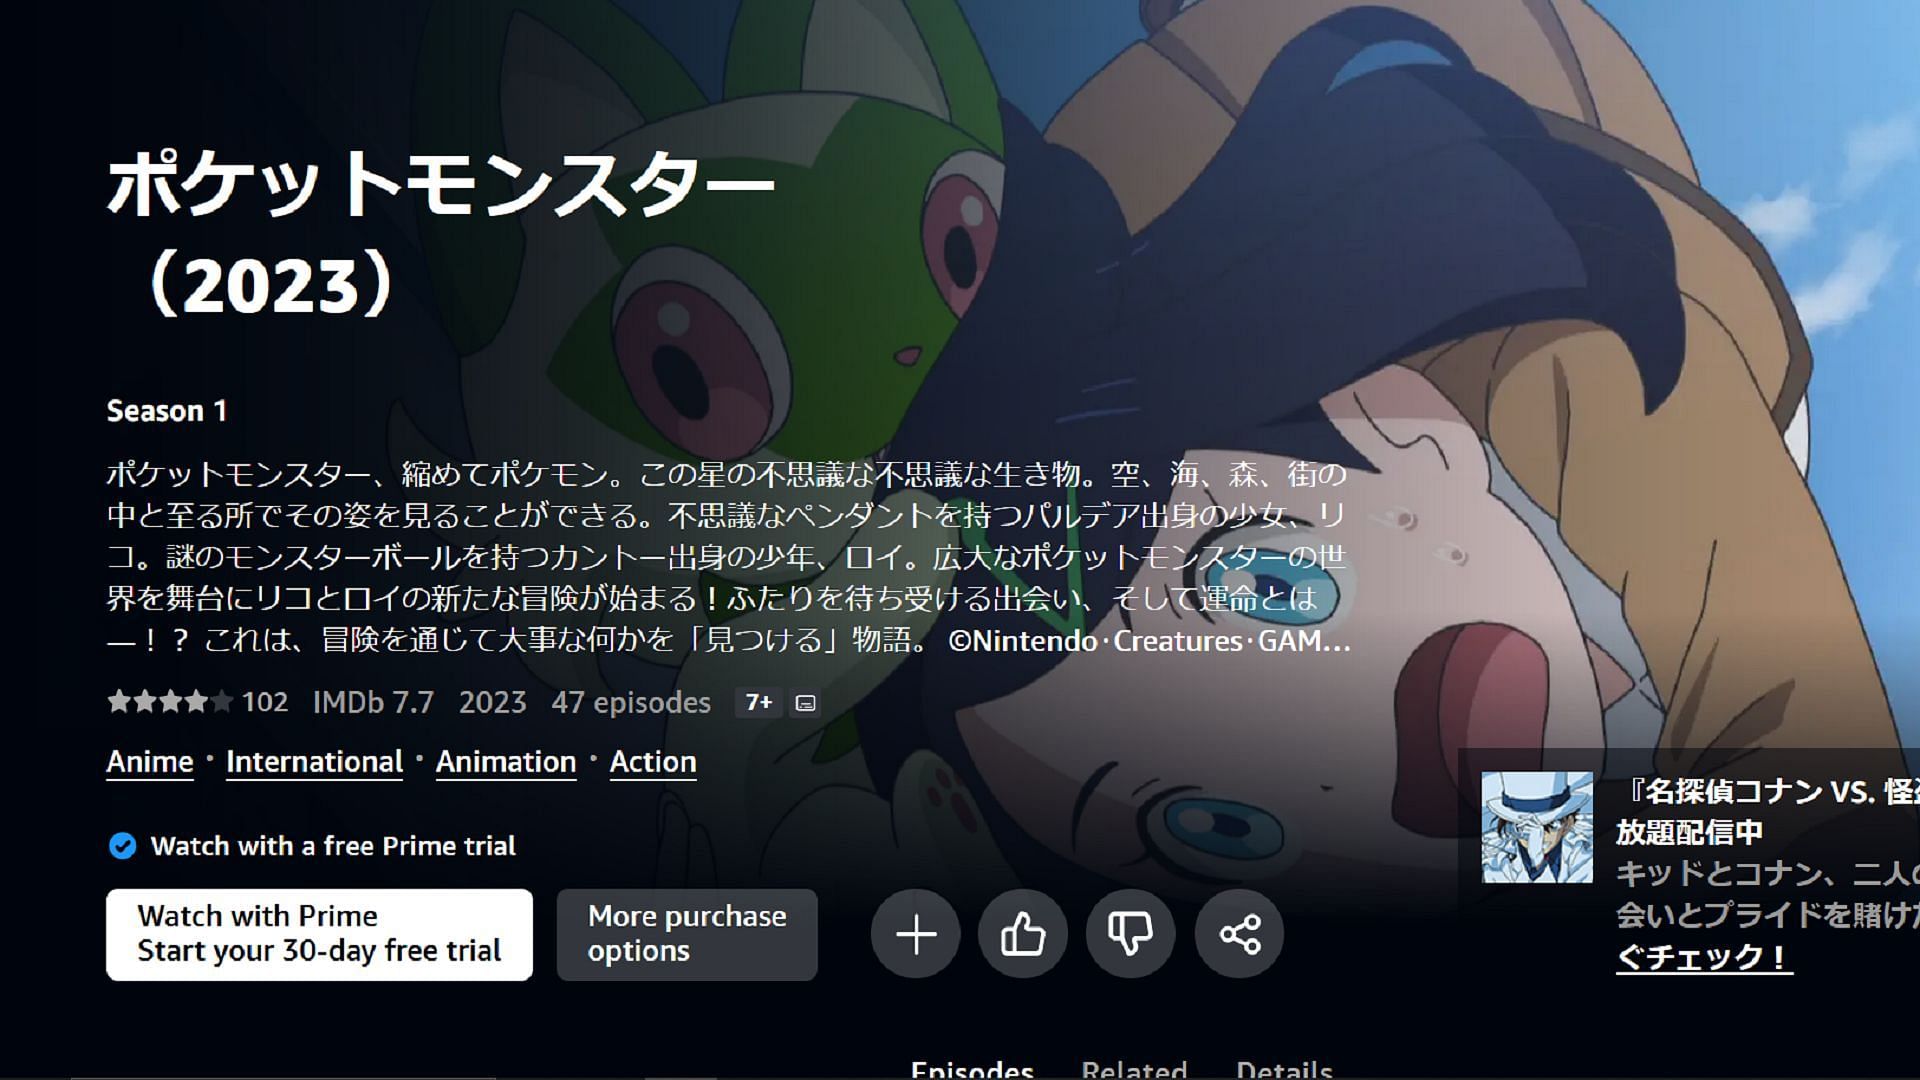 Fans can watch new Pokemon Horizons releases on Amazon Prime Video in Japan (Image via The Pokemon Company/Amazon)